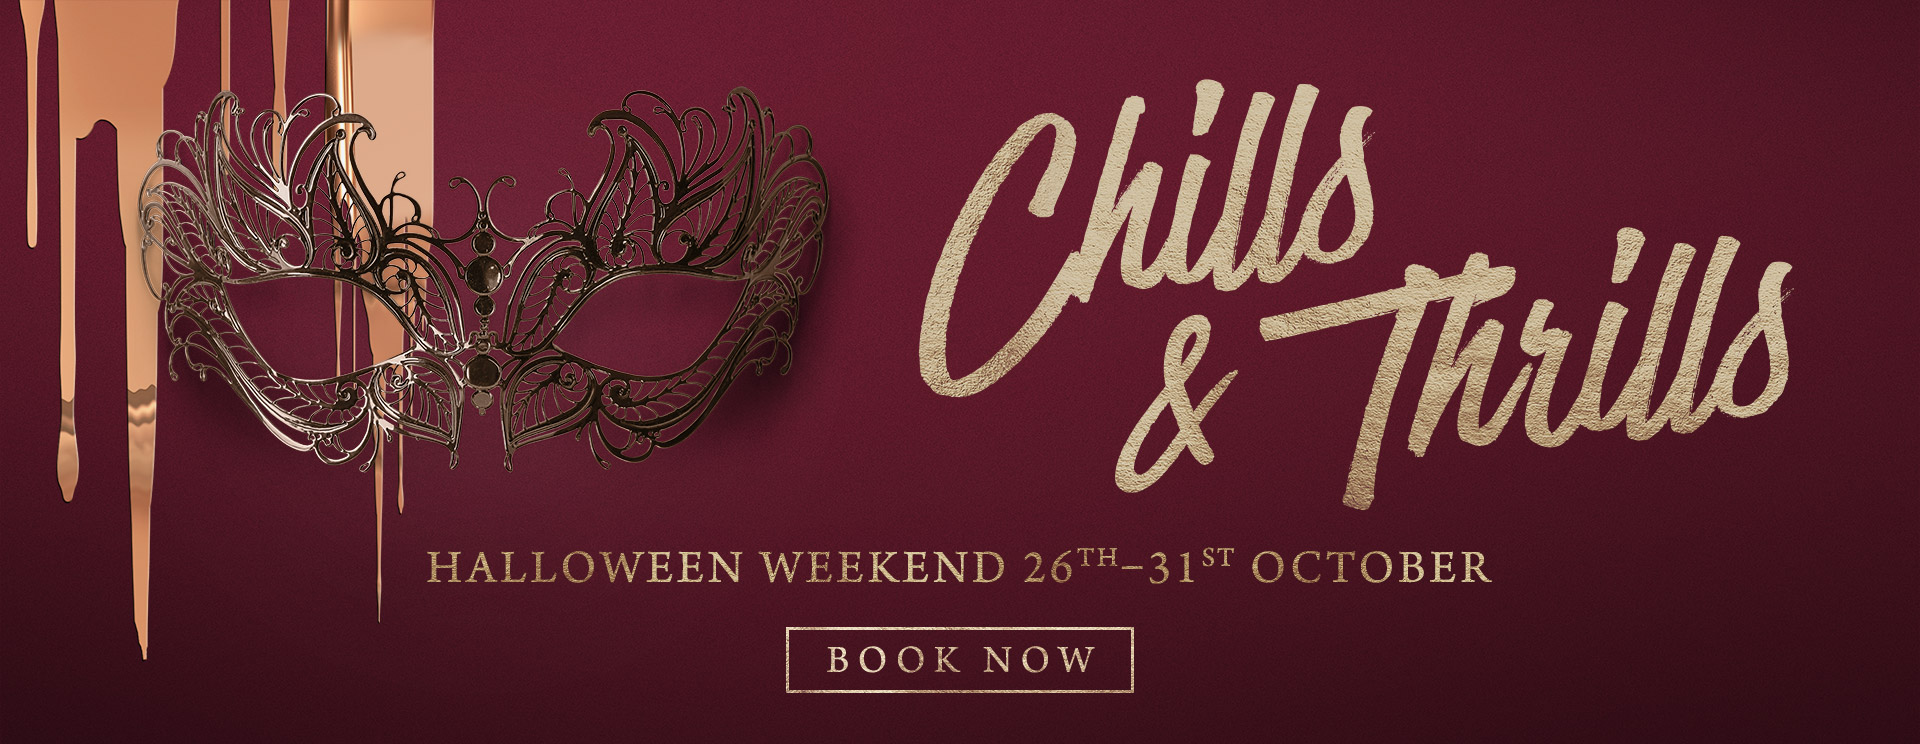 Chills & Thrills this Halloween at The Lyttelton Arms